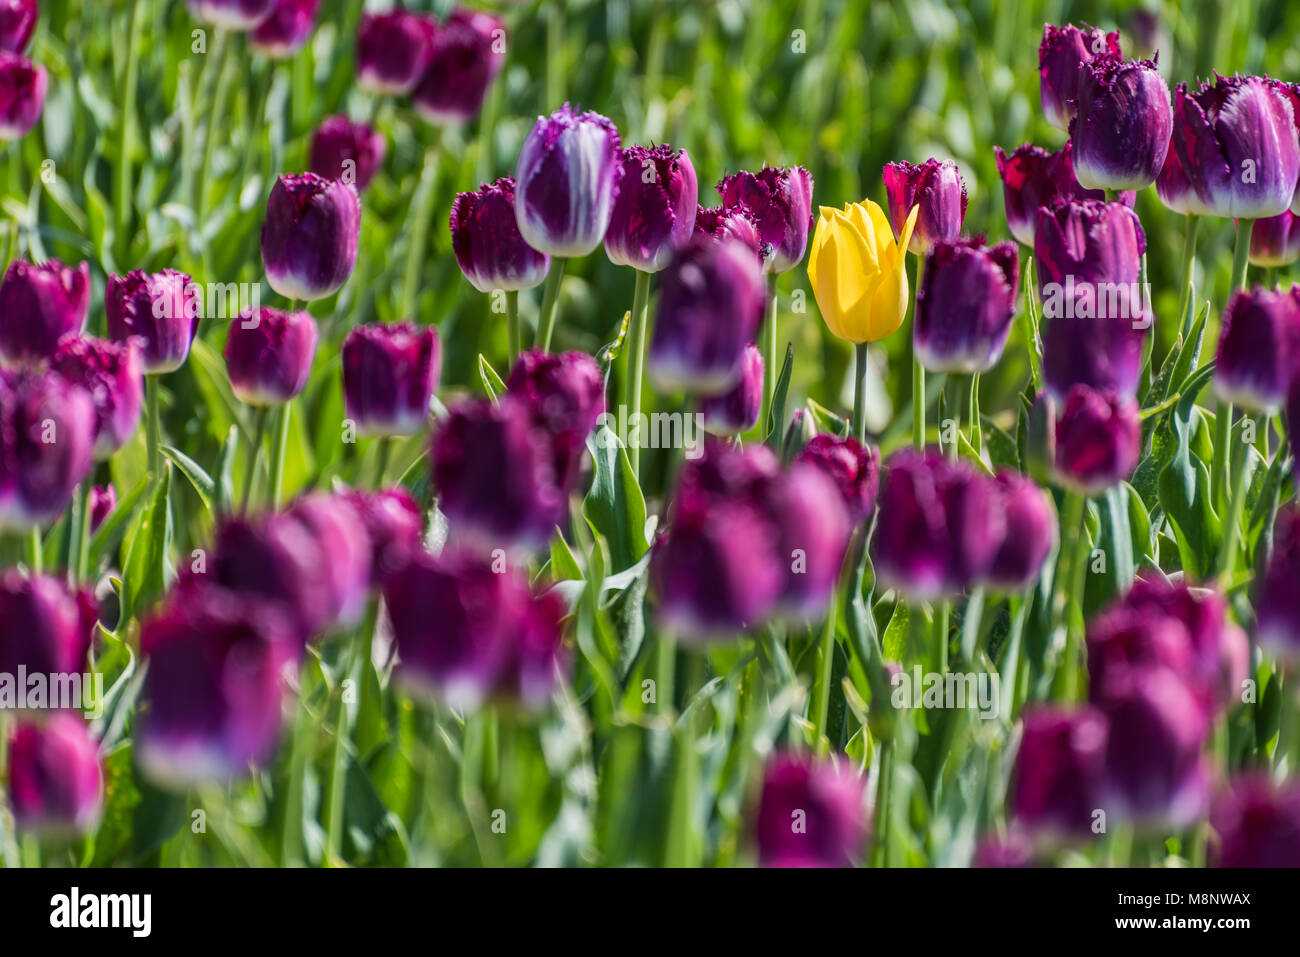 A single yellow tulip is standing in a field of purple tulips in full bloom. The contrast of color makes the yellow tulip stand out against the purple Stock Photo